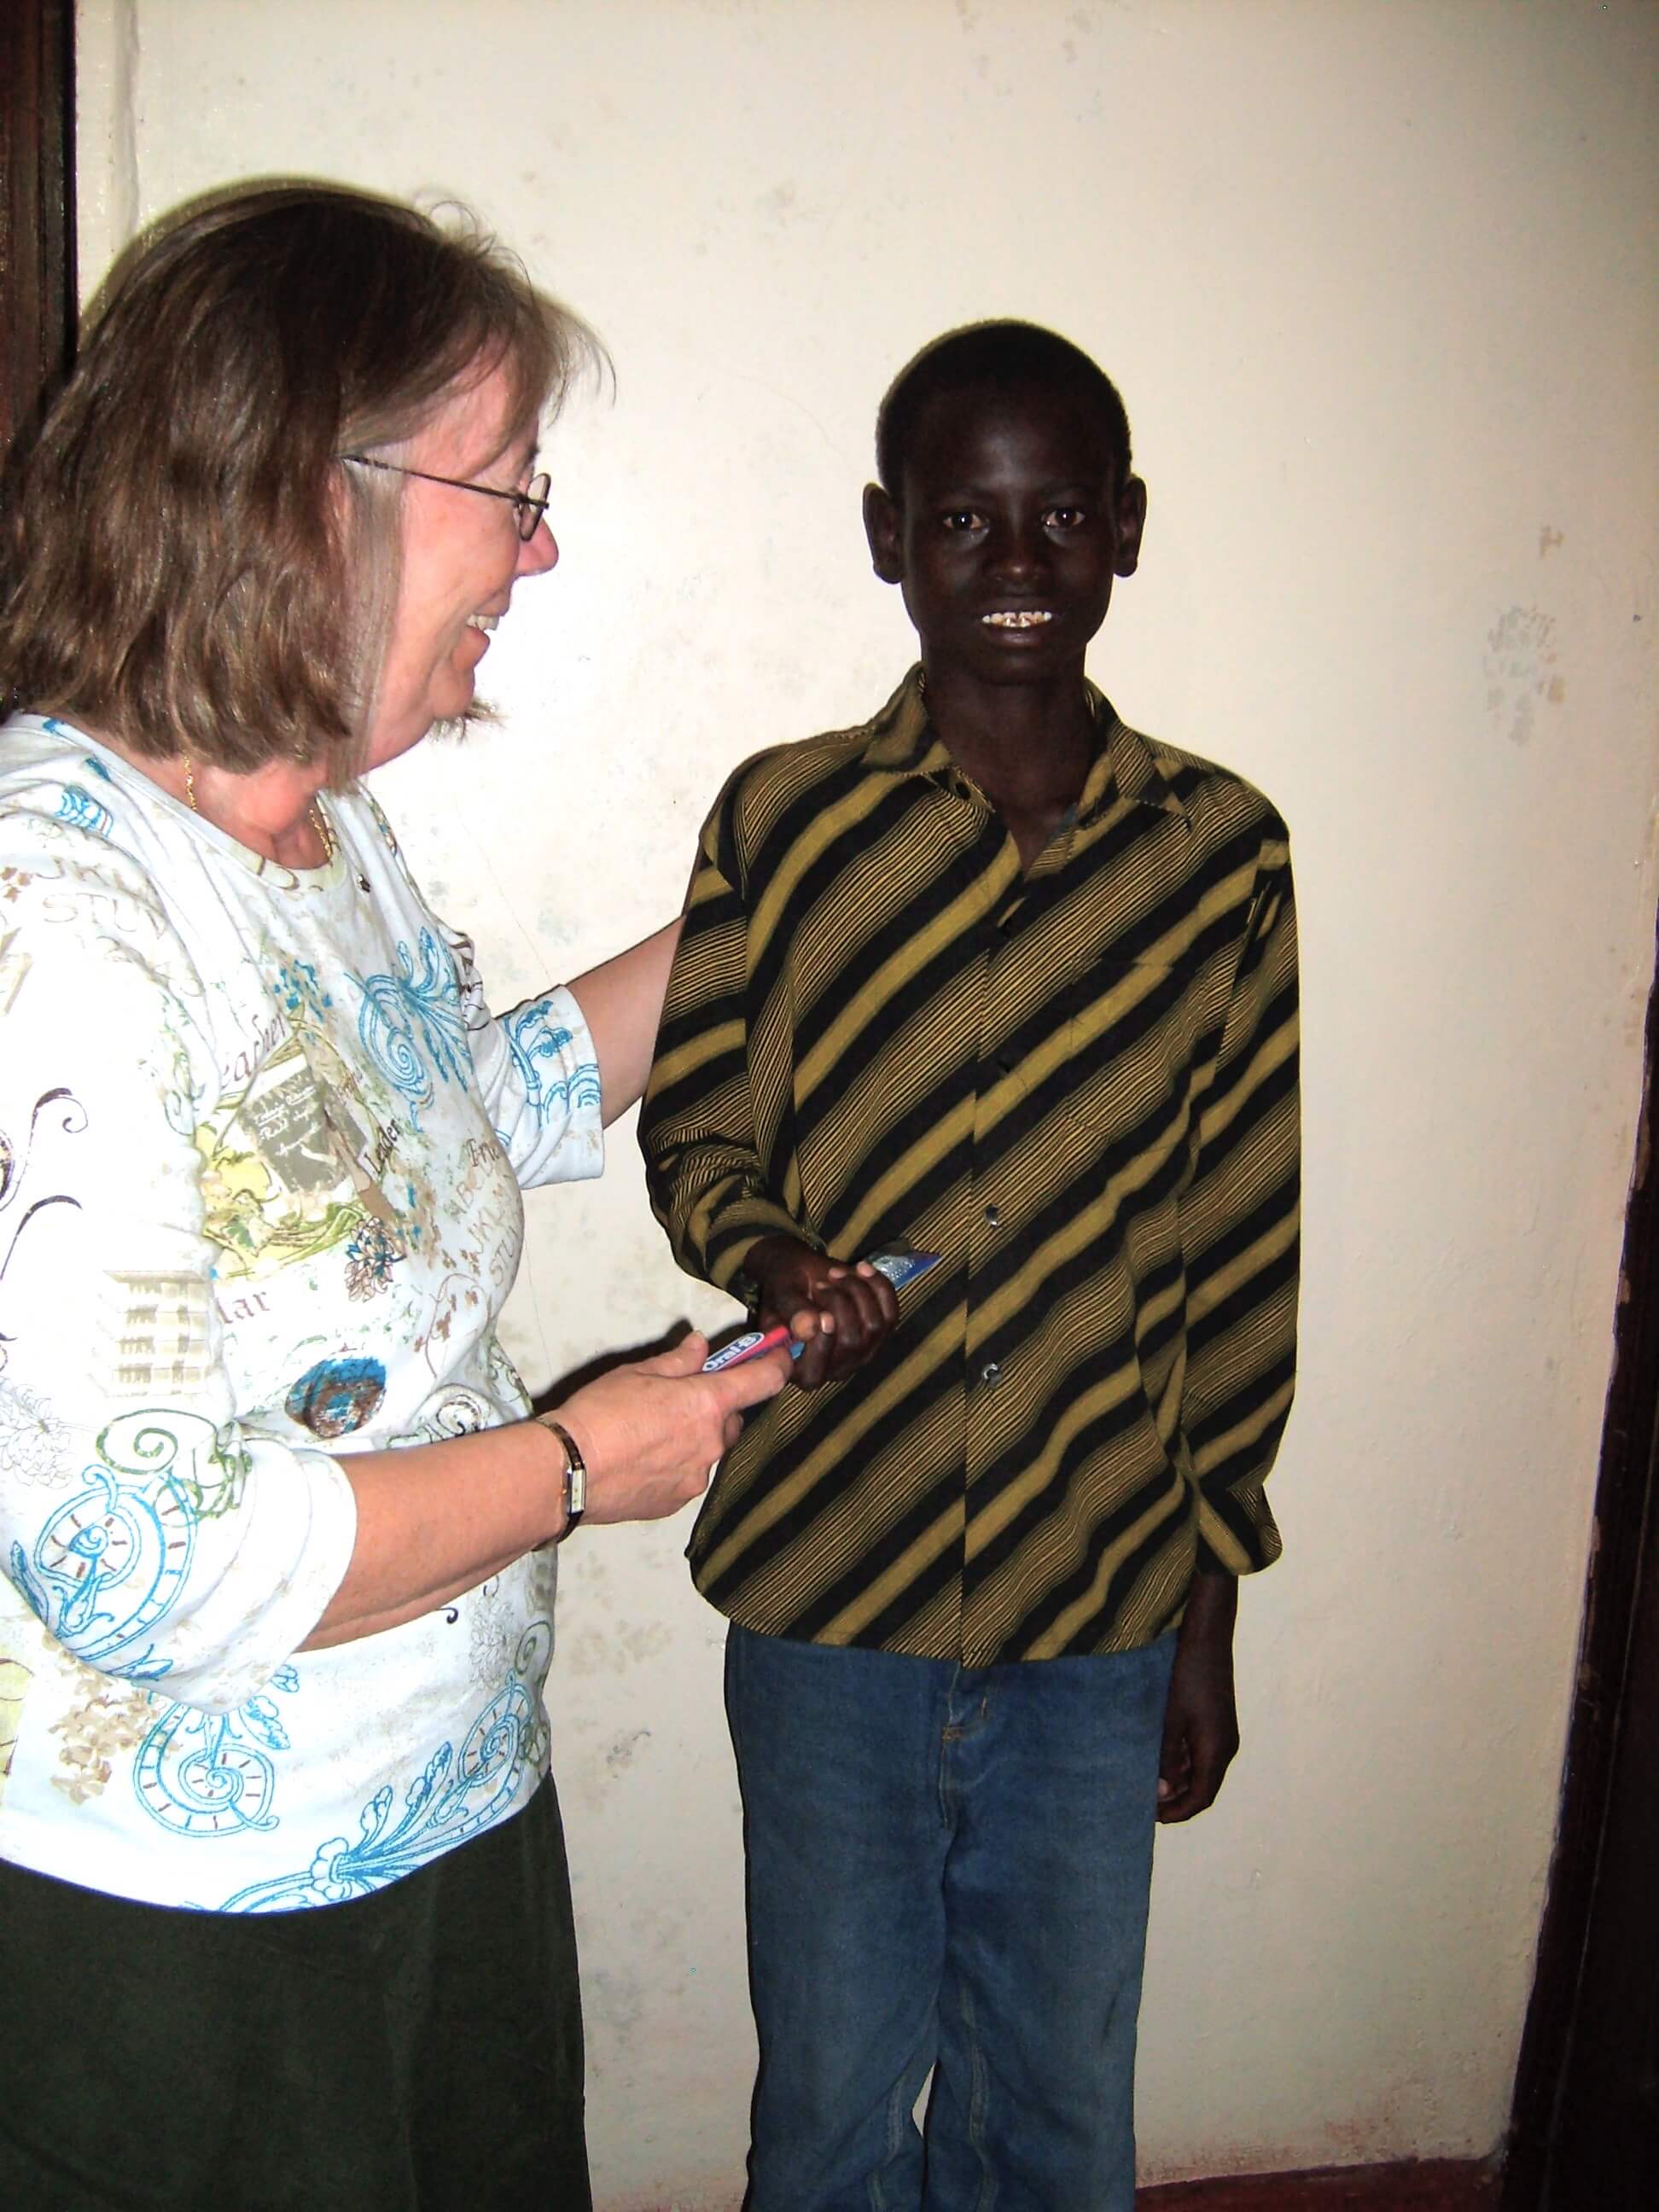 providing scholarships: Tracy Braun from EC helping a student in Kenya